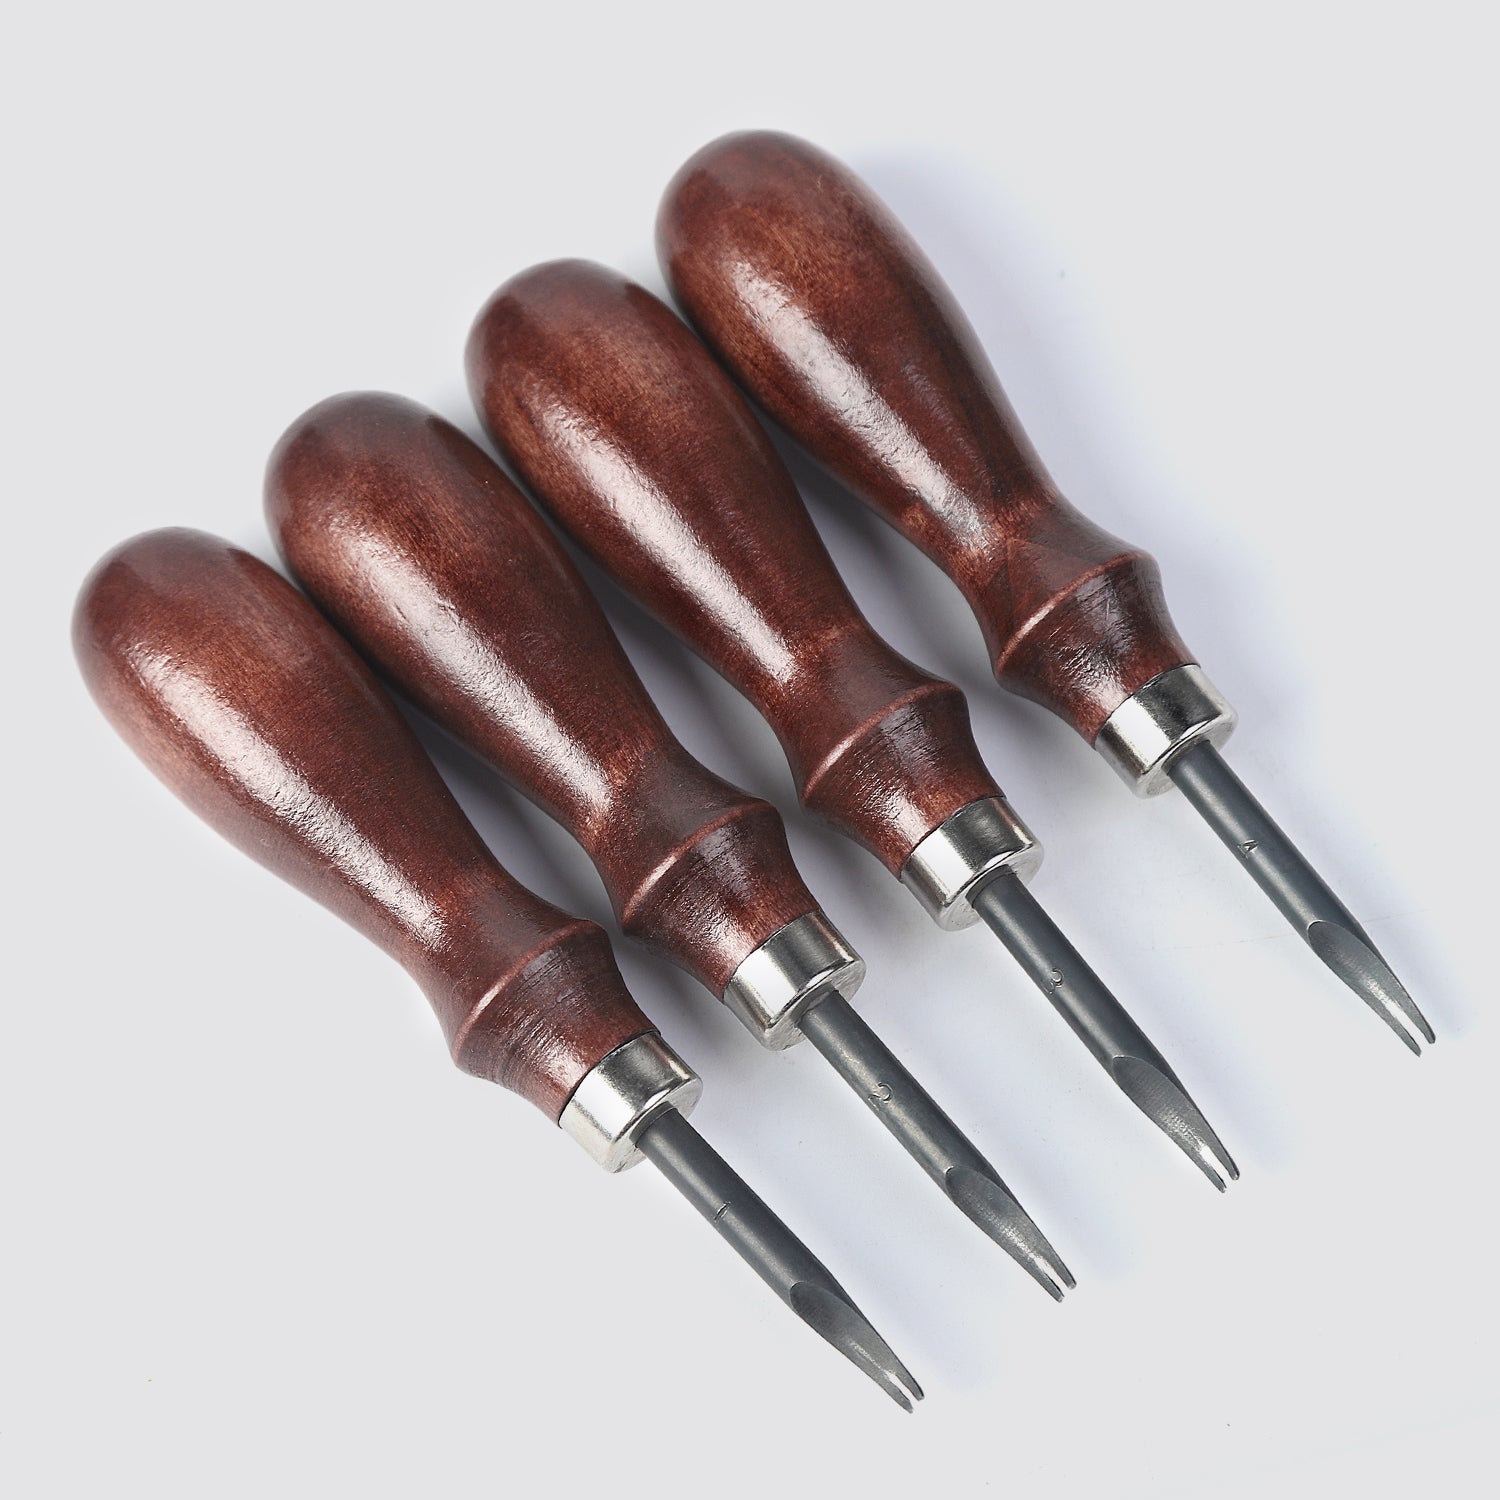  EXCEART 6 Pcs Leather Cutting Leather Push Beveler Leather  Craft Tool Leather Cutter Skiving Leather Beveler Tool Leather Bevelers  Leather Carving Beveler Leather Manual Wooden